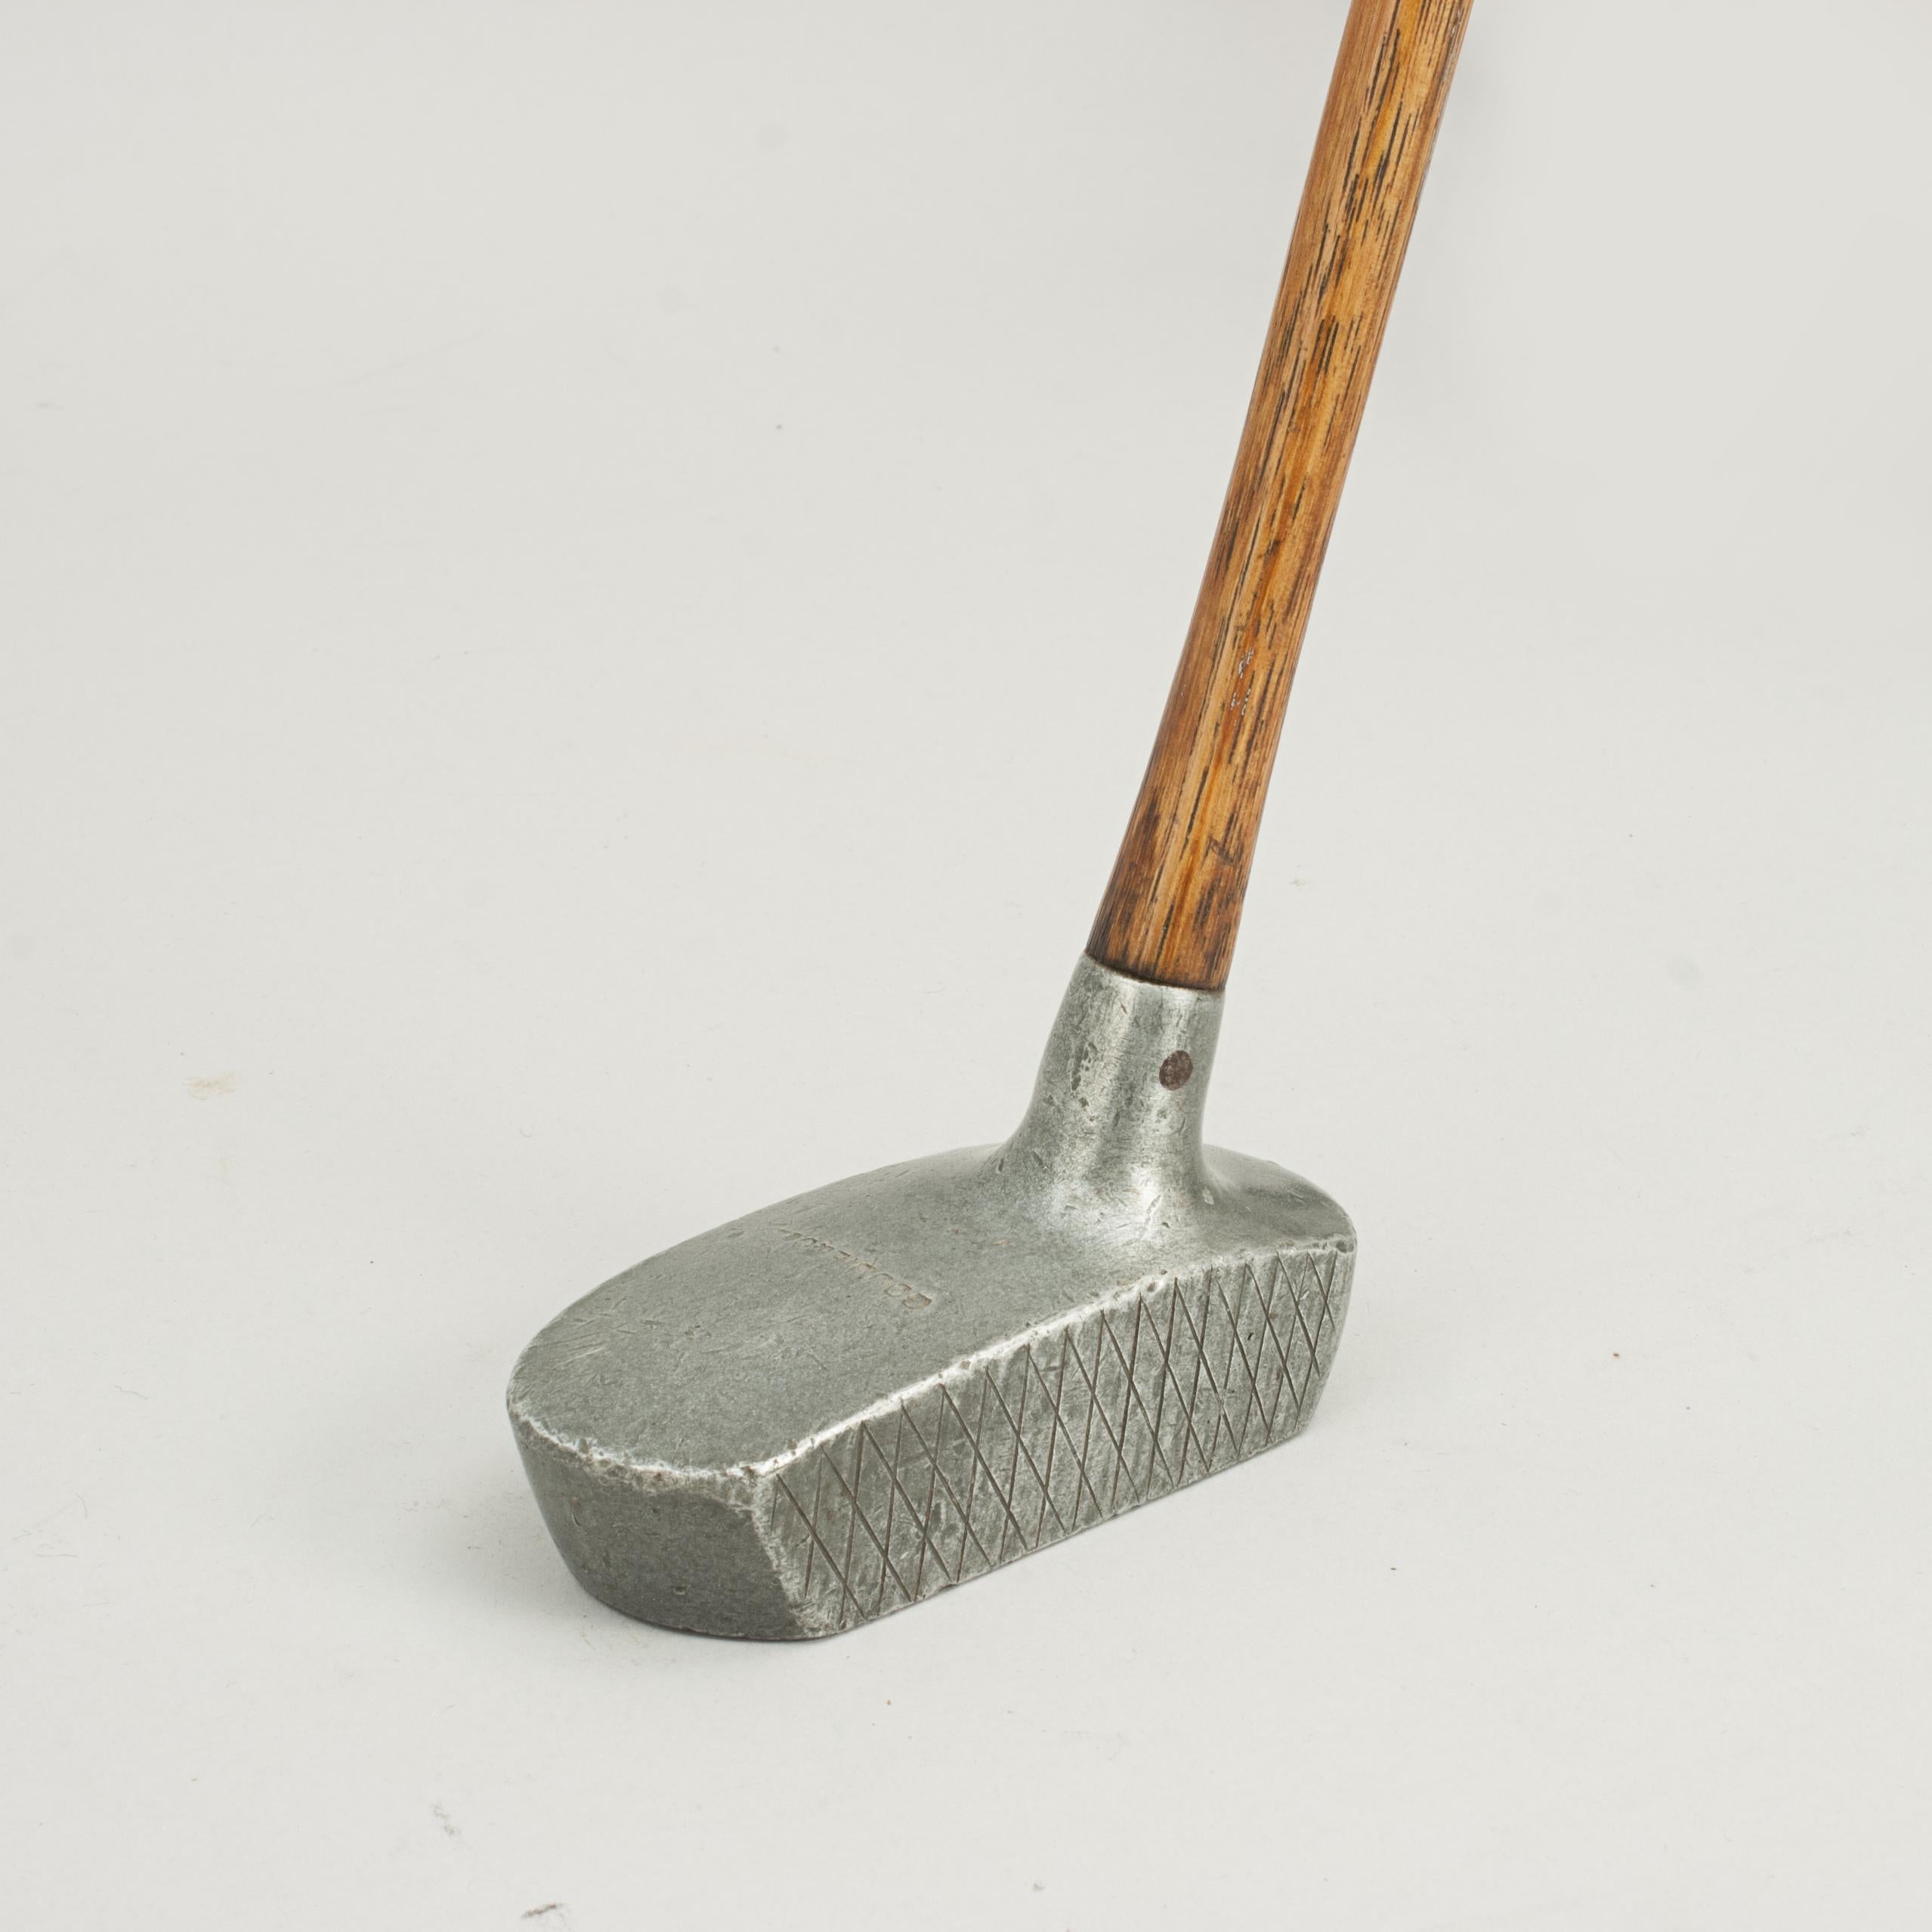 Aluminium Center Shafted Putter, Goodie & Co.
A good example of an aluminum Schenectady type putter by Goodie & Co. The top of the head is stamped 'Goodie & Co.', face with X scoring. The club is in good original condition, with a hickory shaft